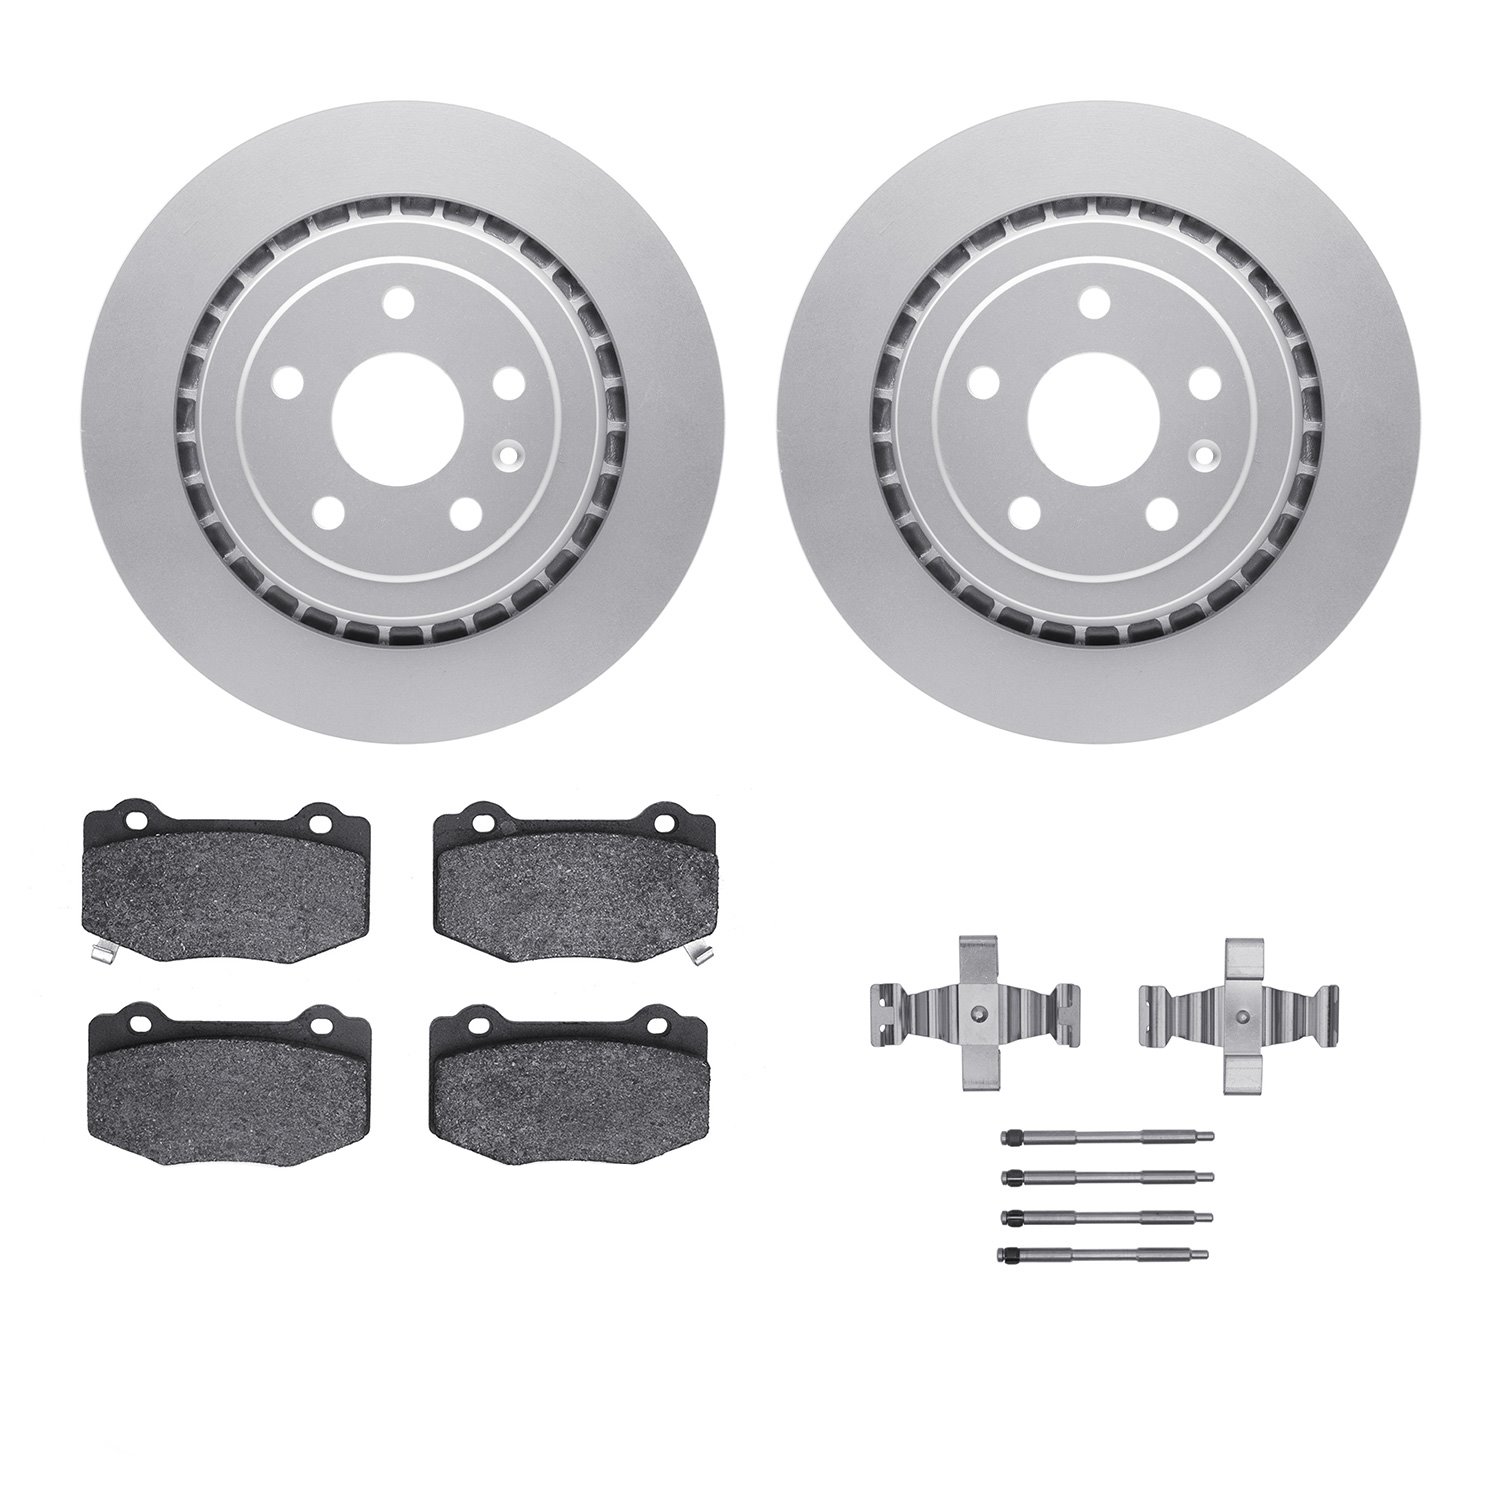 4312-47041 Geospec Brake Rotors with 3000-Series Ceramic Brake Pads & Hardware, Fits Select GM, Position: Rear